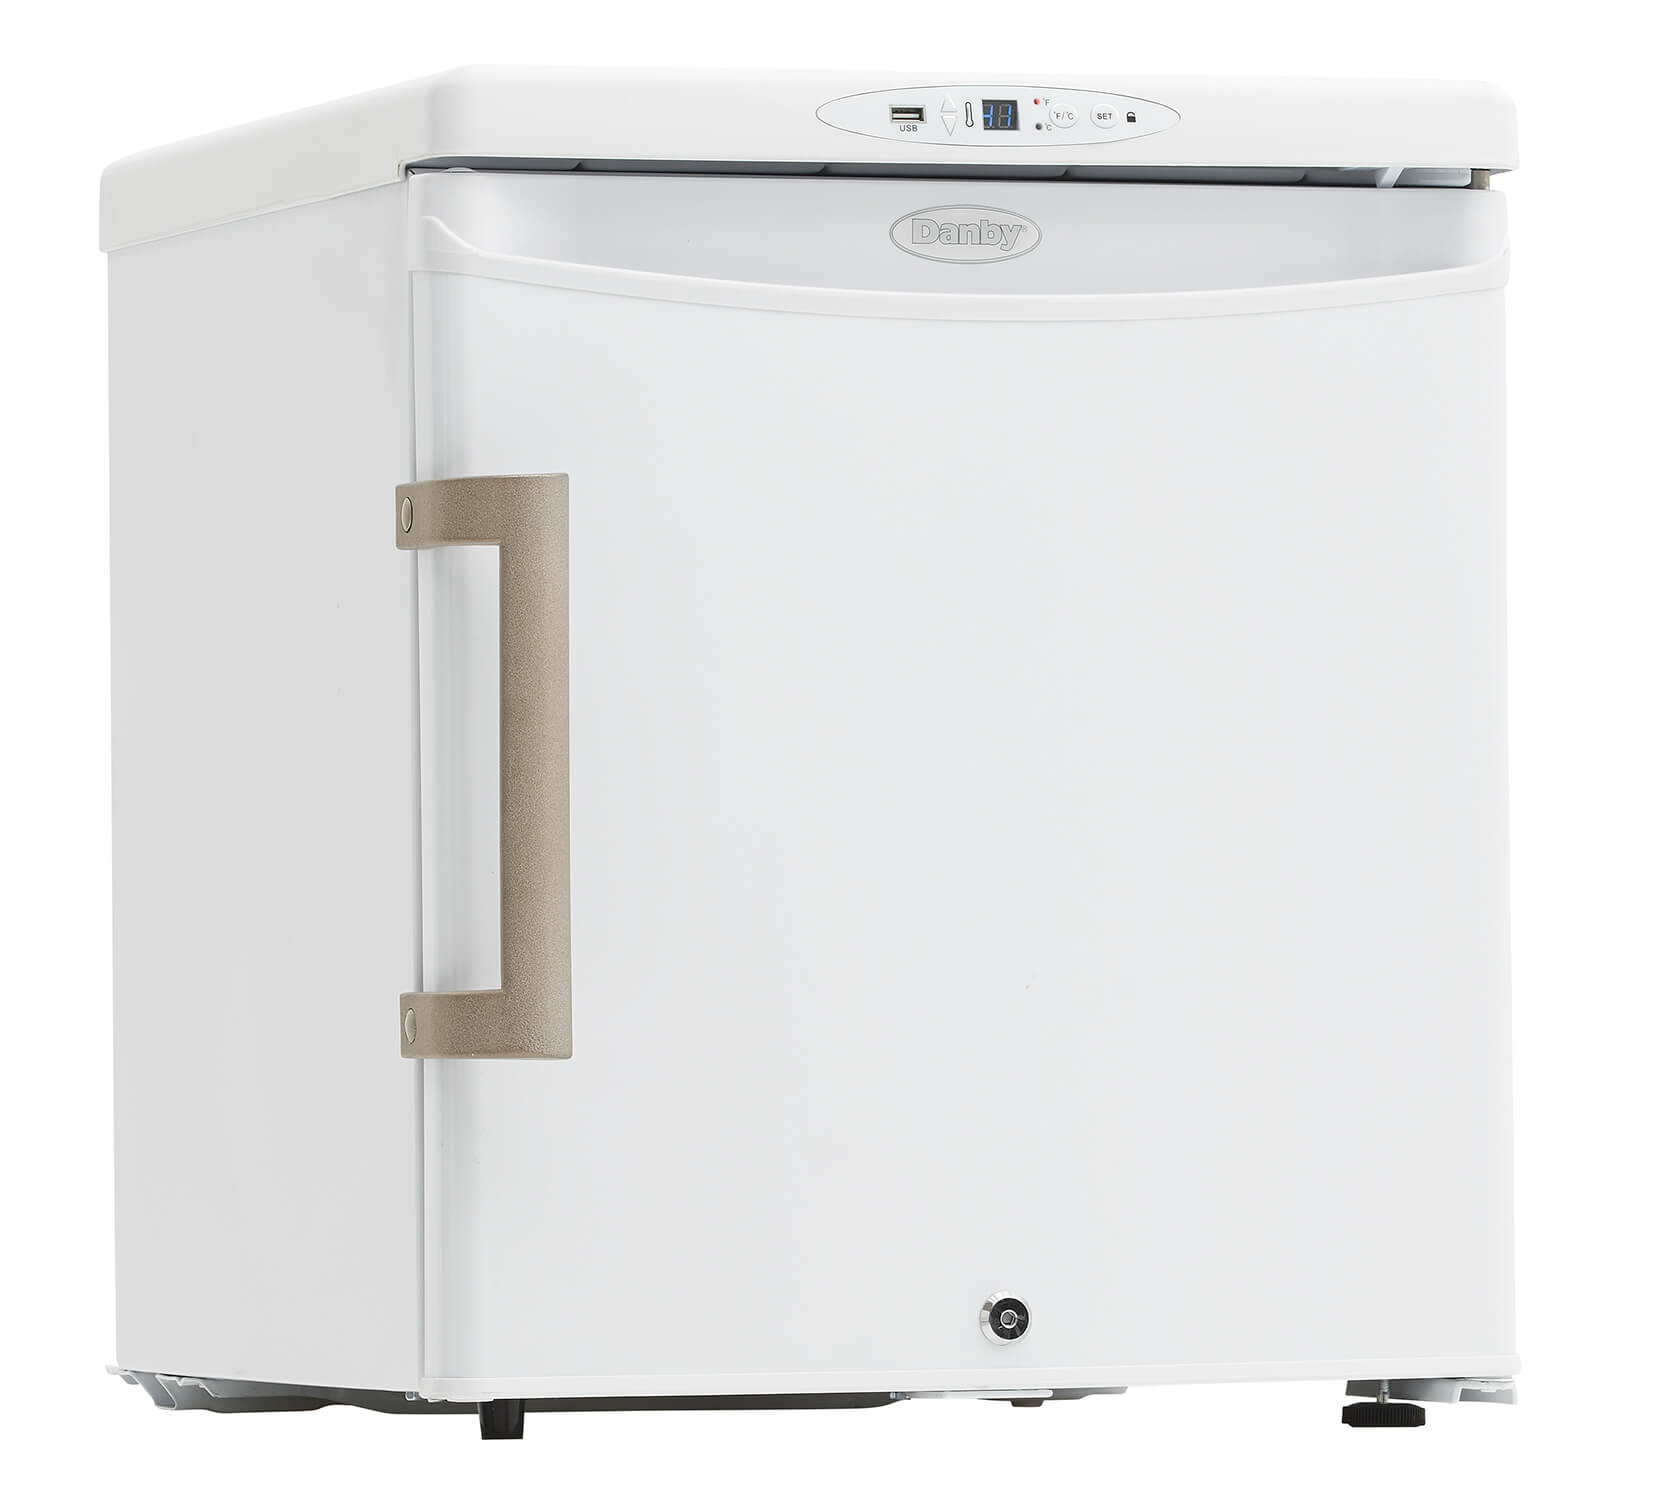 Danby DH016A1W Danby Health Dh016A1W Medical Refrigerator - 1.6 Cubic Foot - White